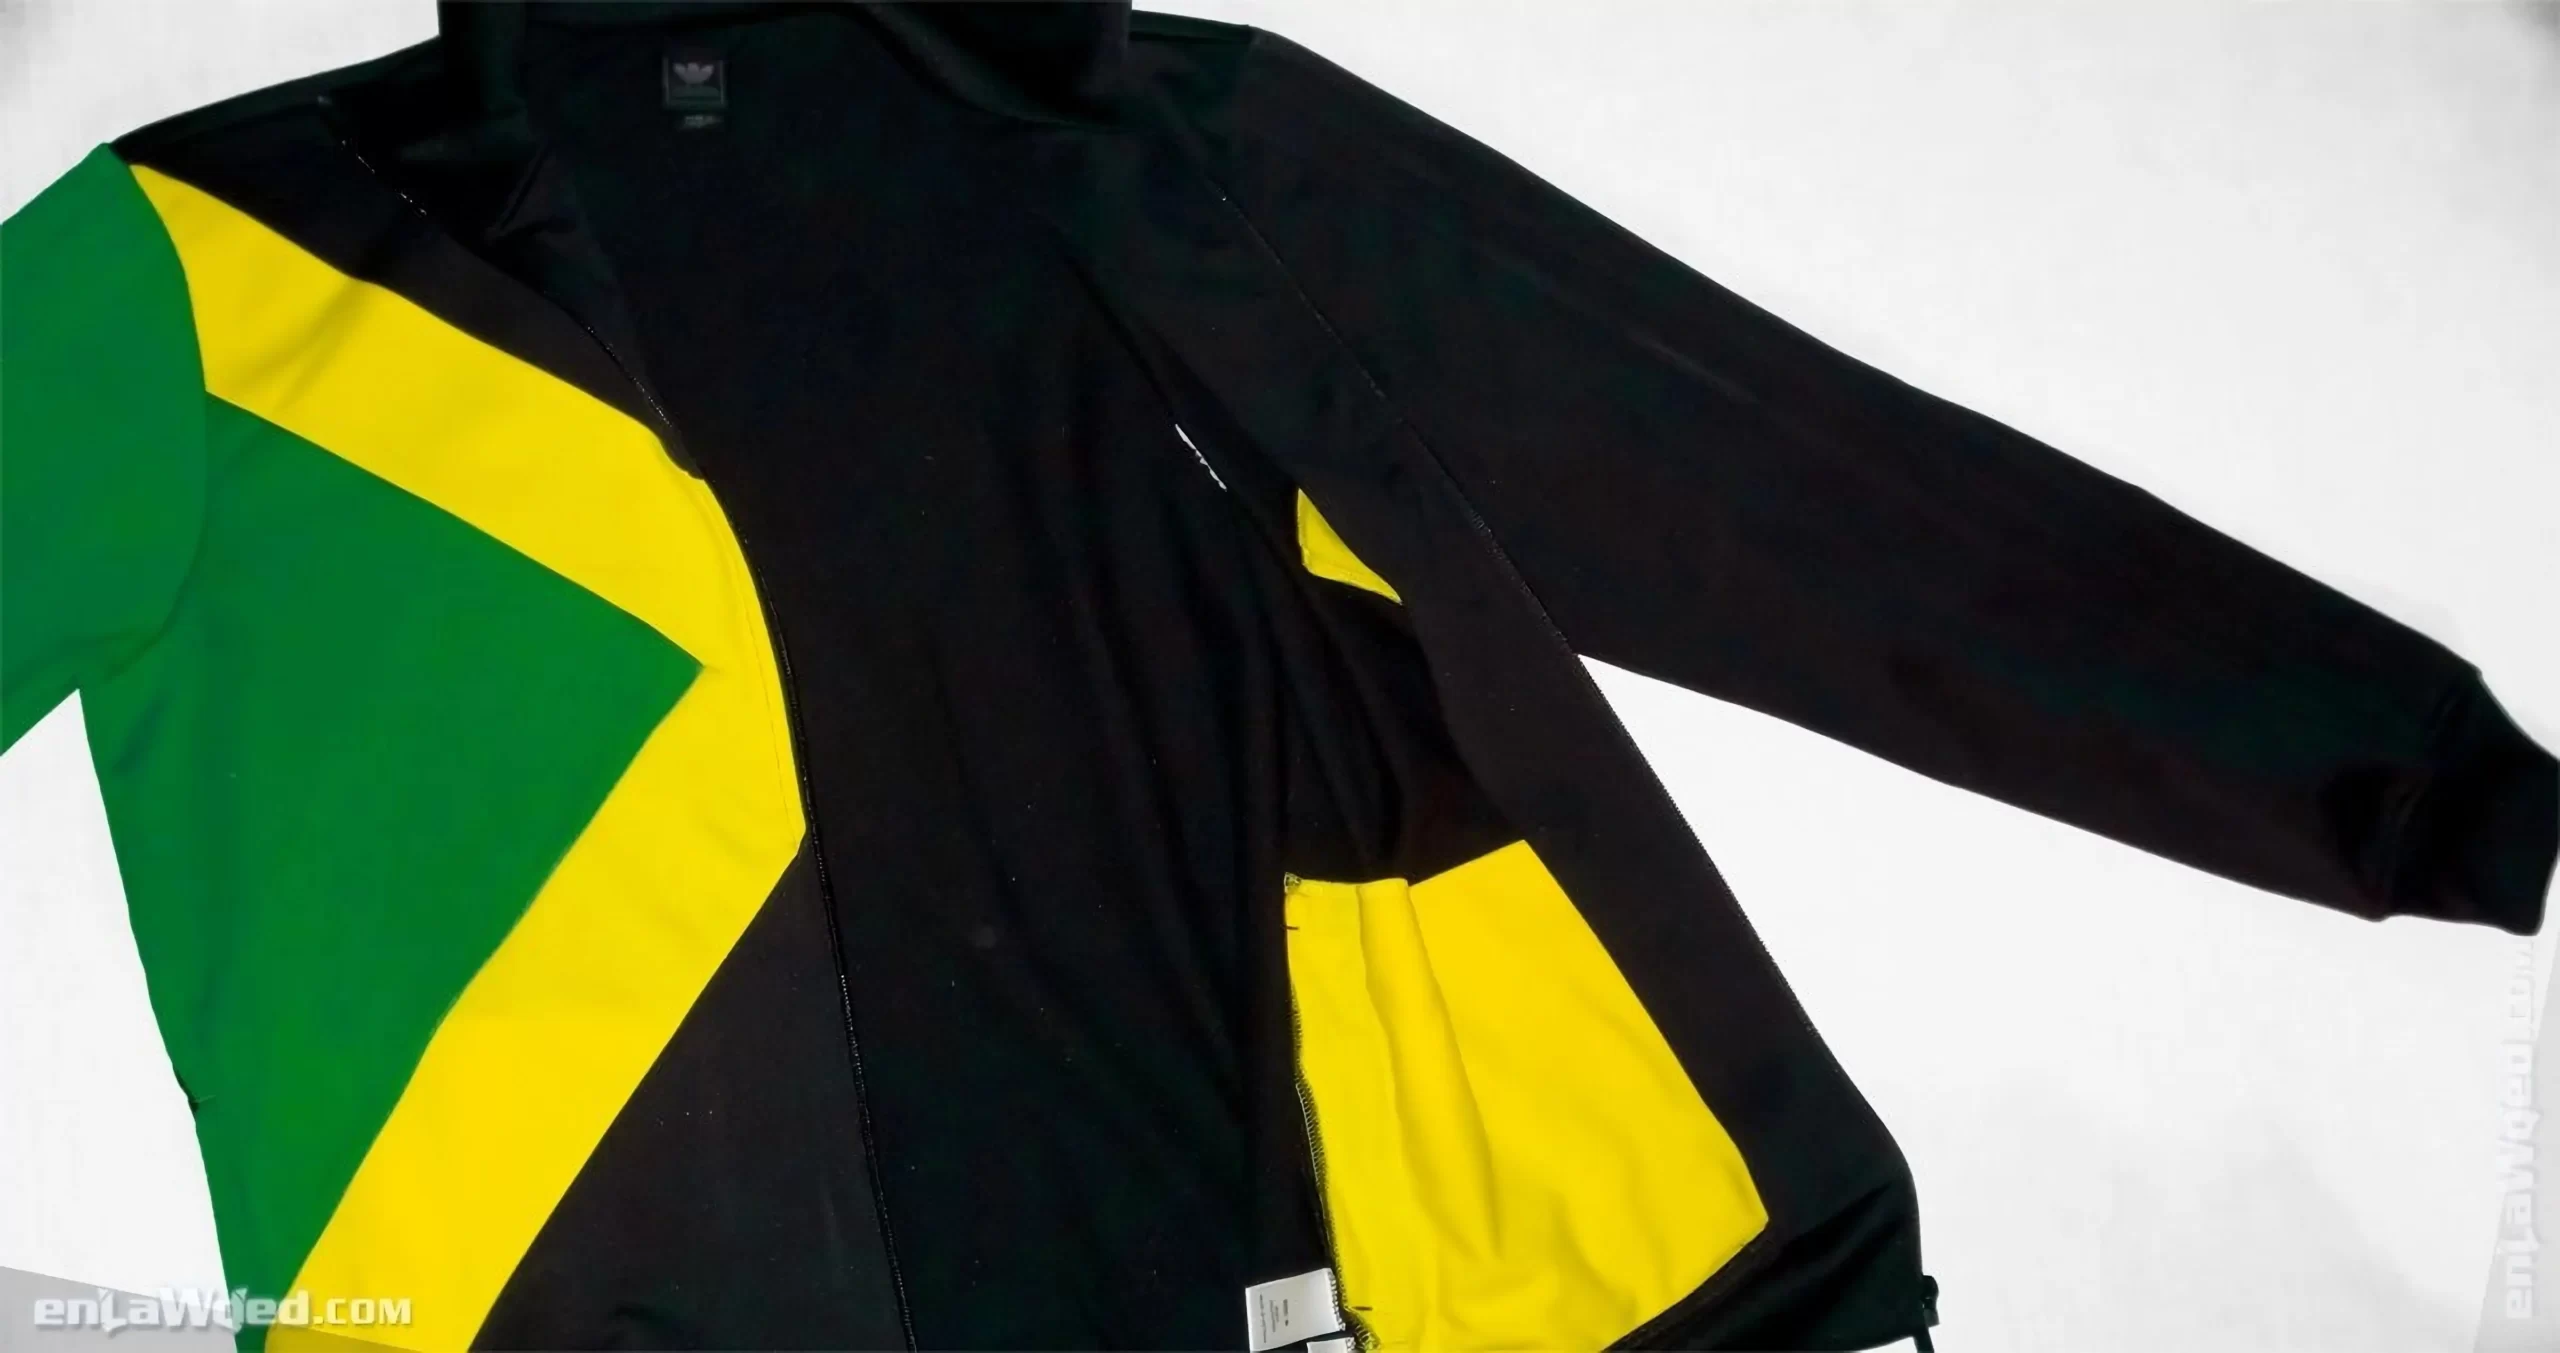 Men’s 2007 Cool Runnings Movie Track Top by Adidas: Recognized (EnLawded.com file #lmch9yfywwjzabp93m9)